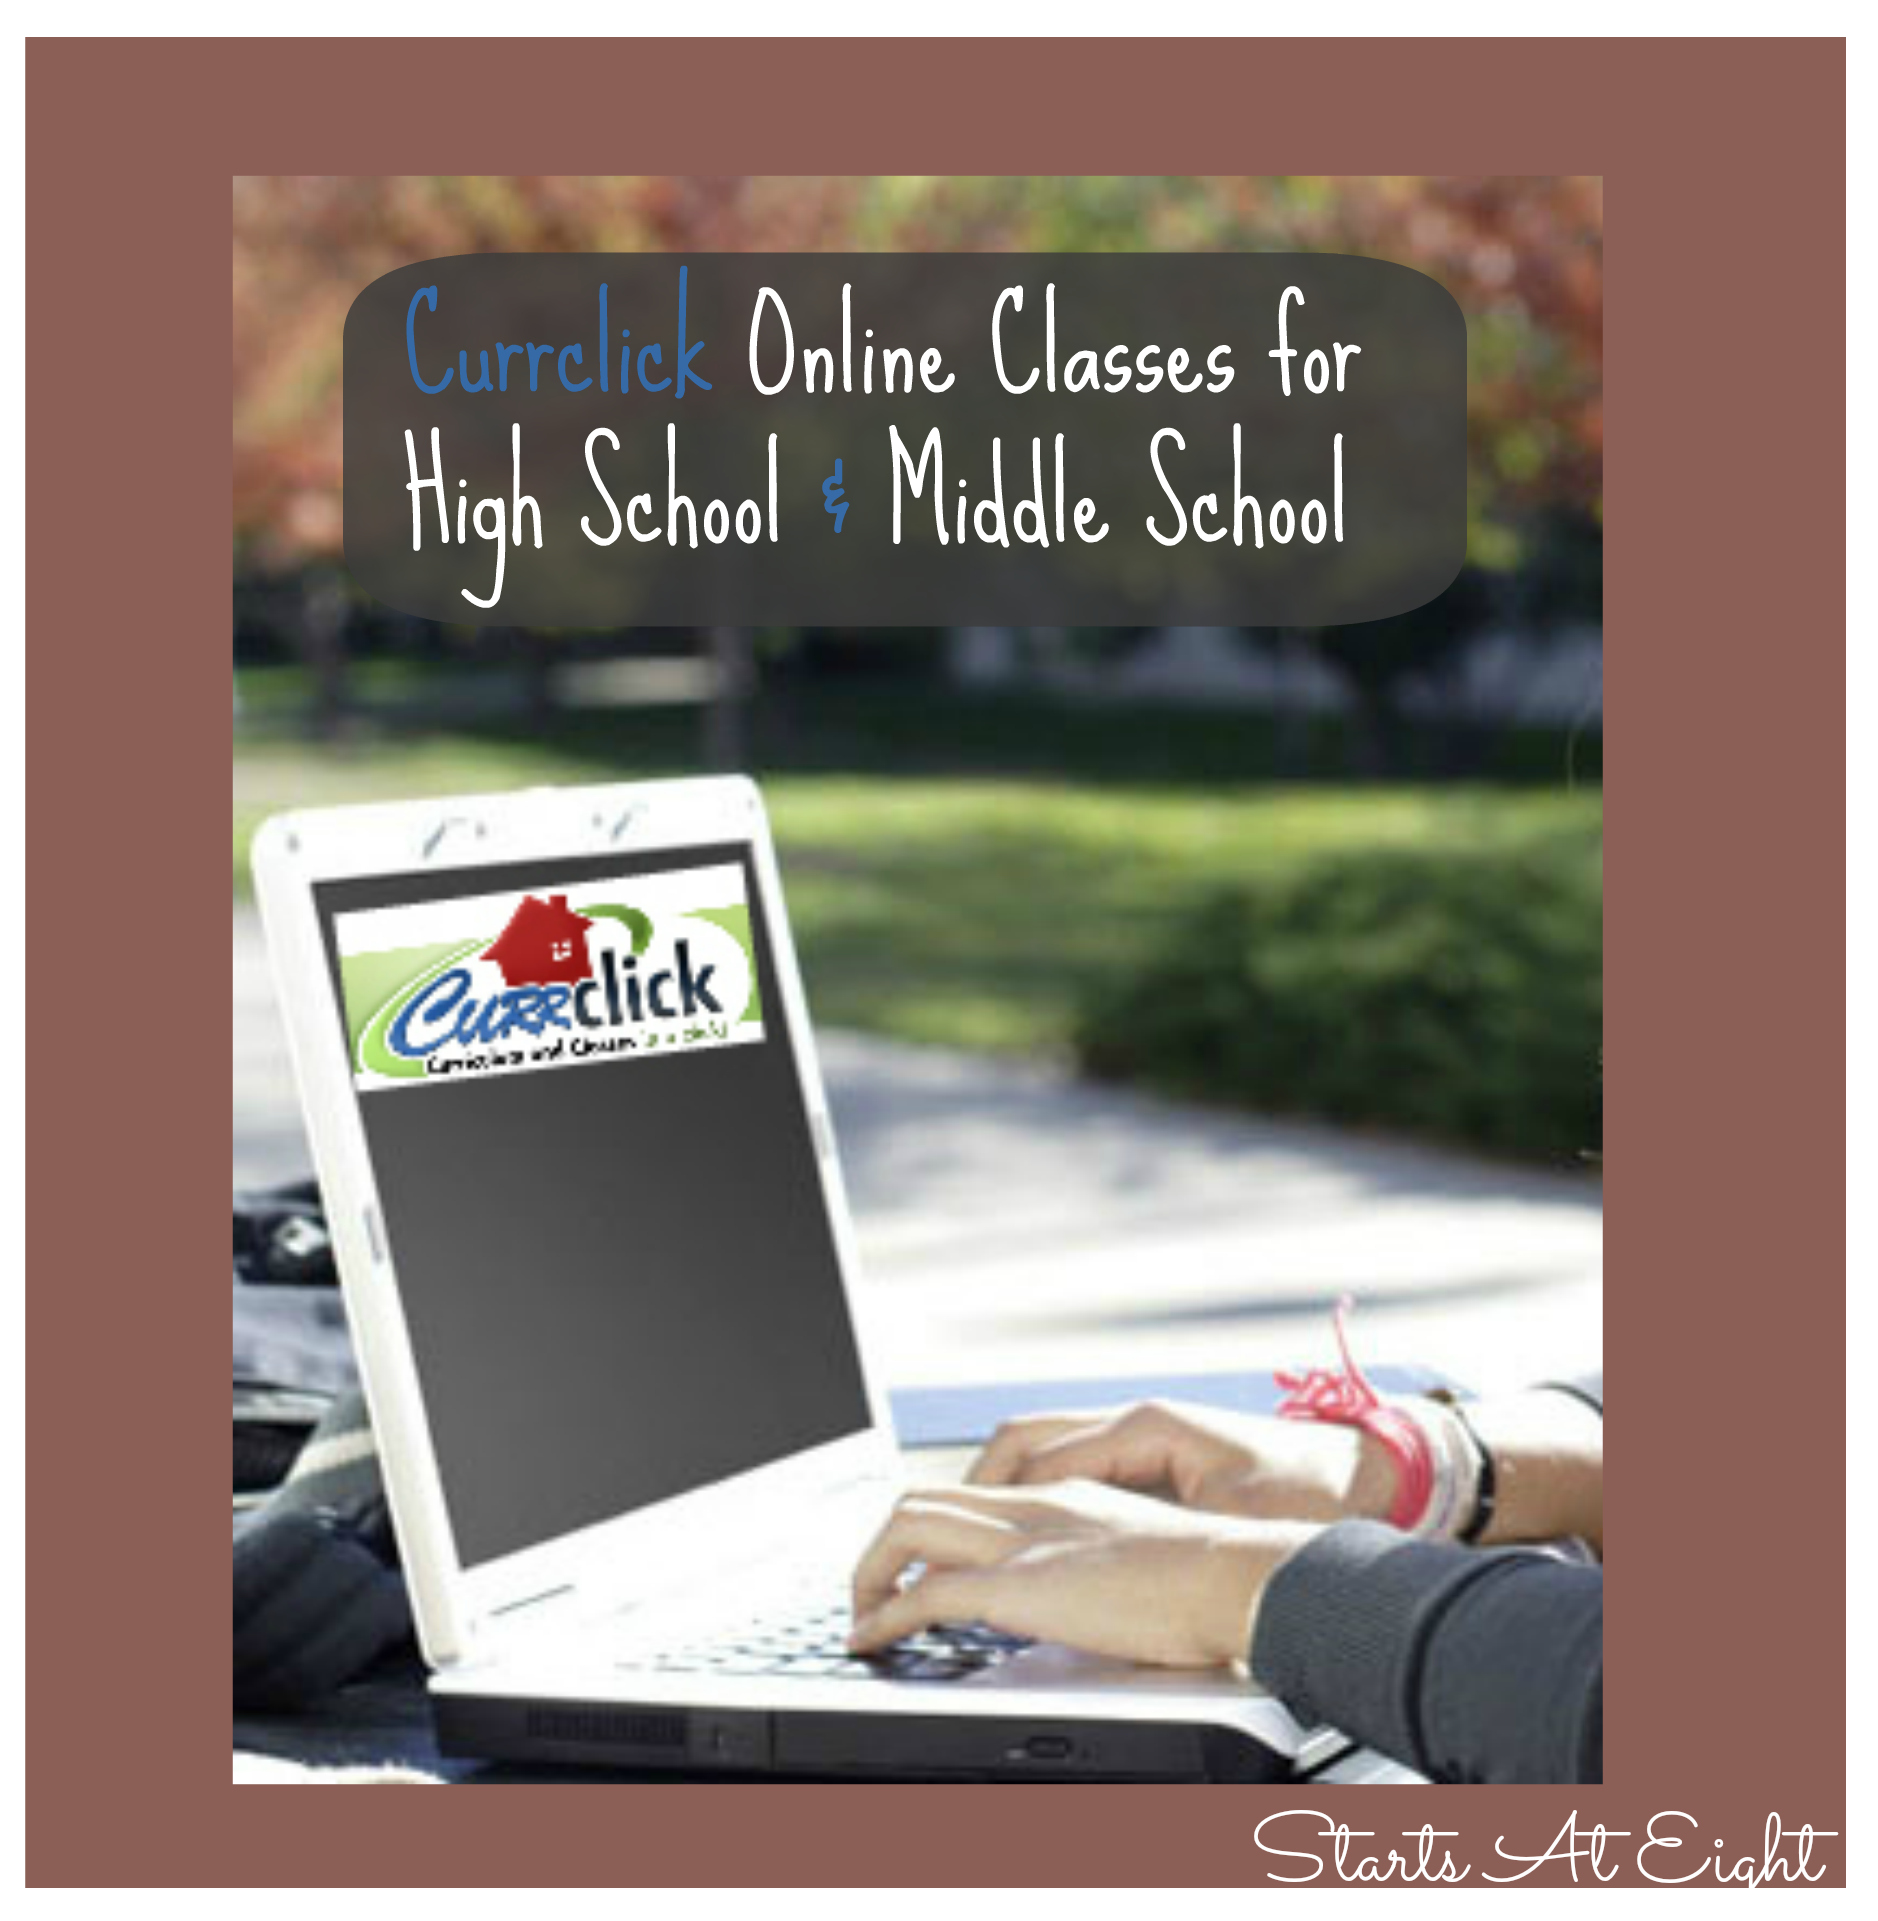 Currclick-Online-Classes-for-High-School-Middle-School.jpg